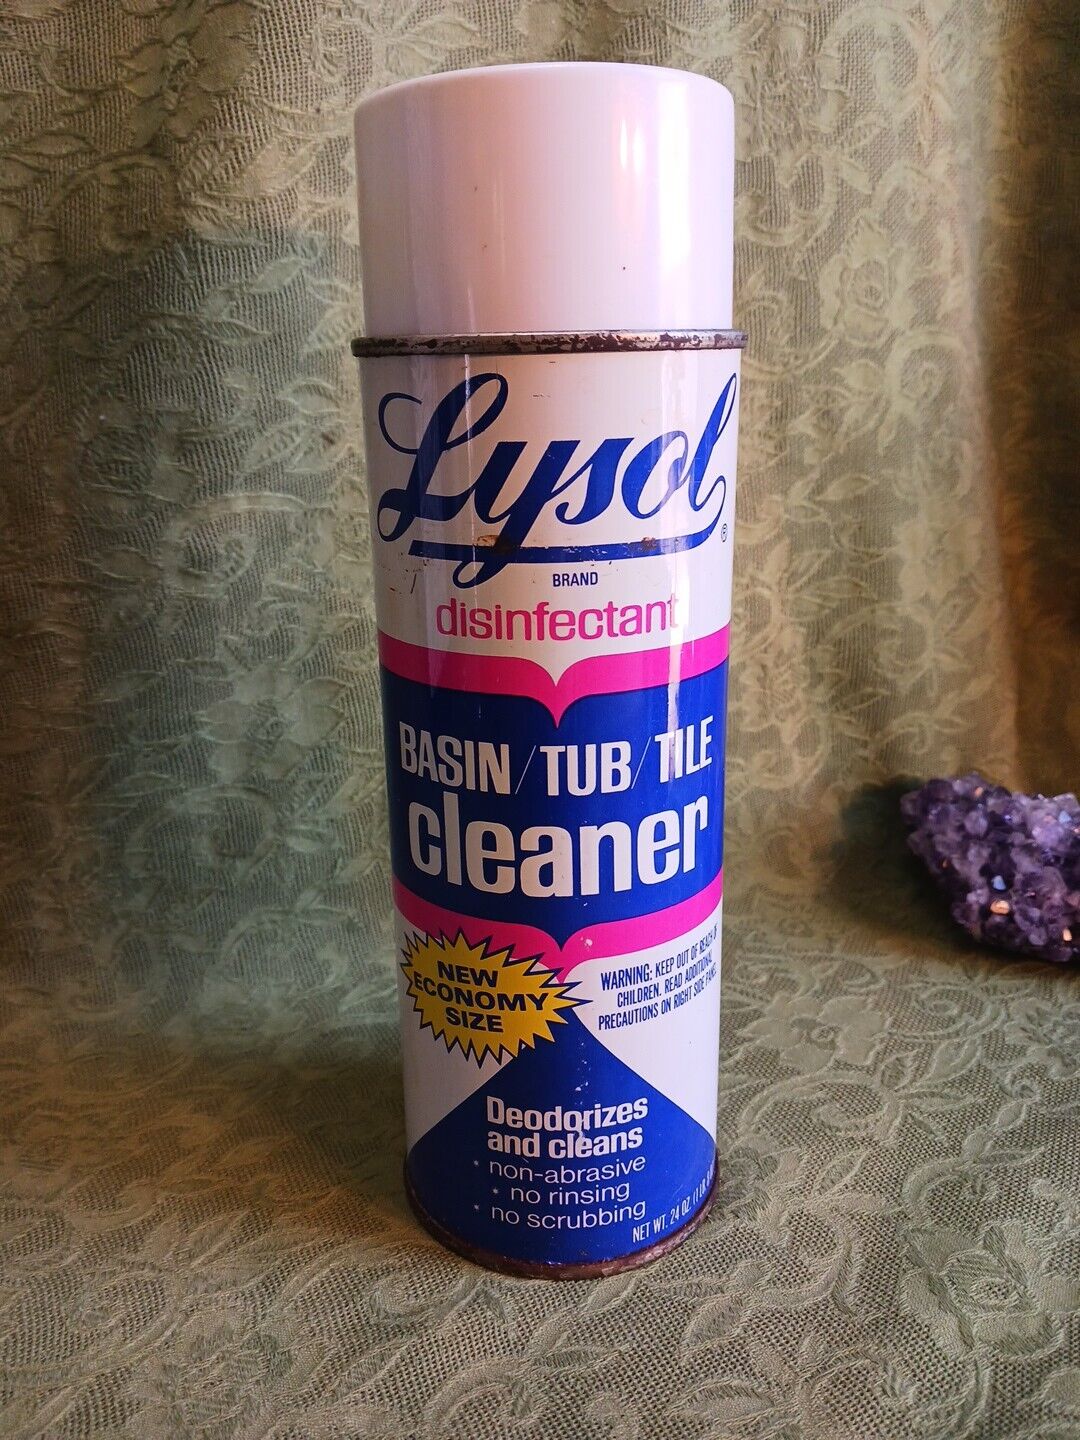 VTG Lysol Disinfectant Basin Tub And Tile Economy 24oz Metal Can MOVIE PROP 